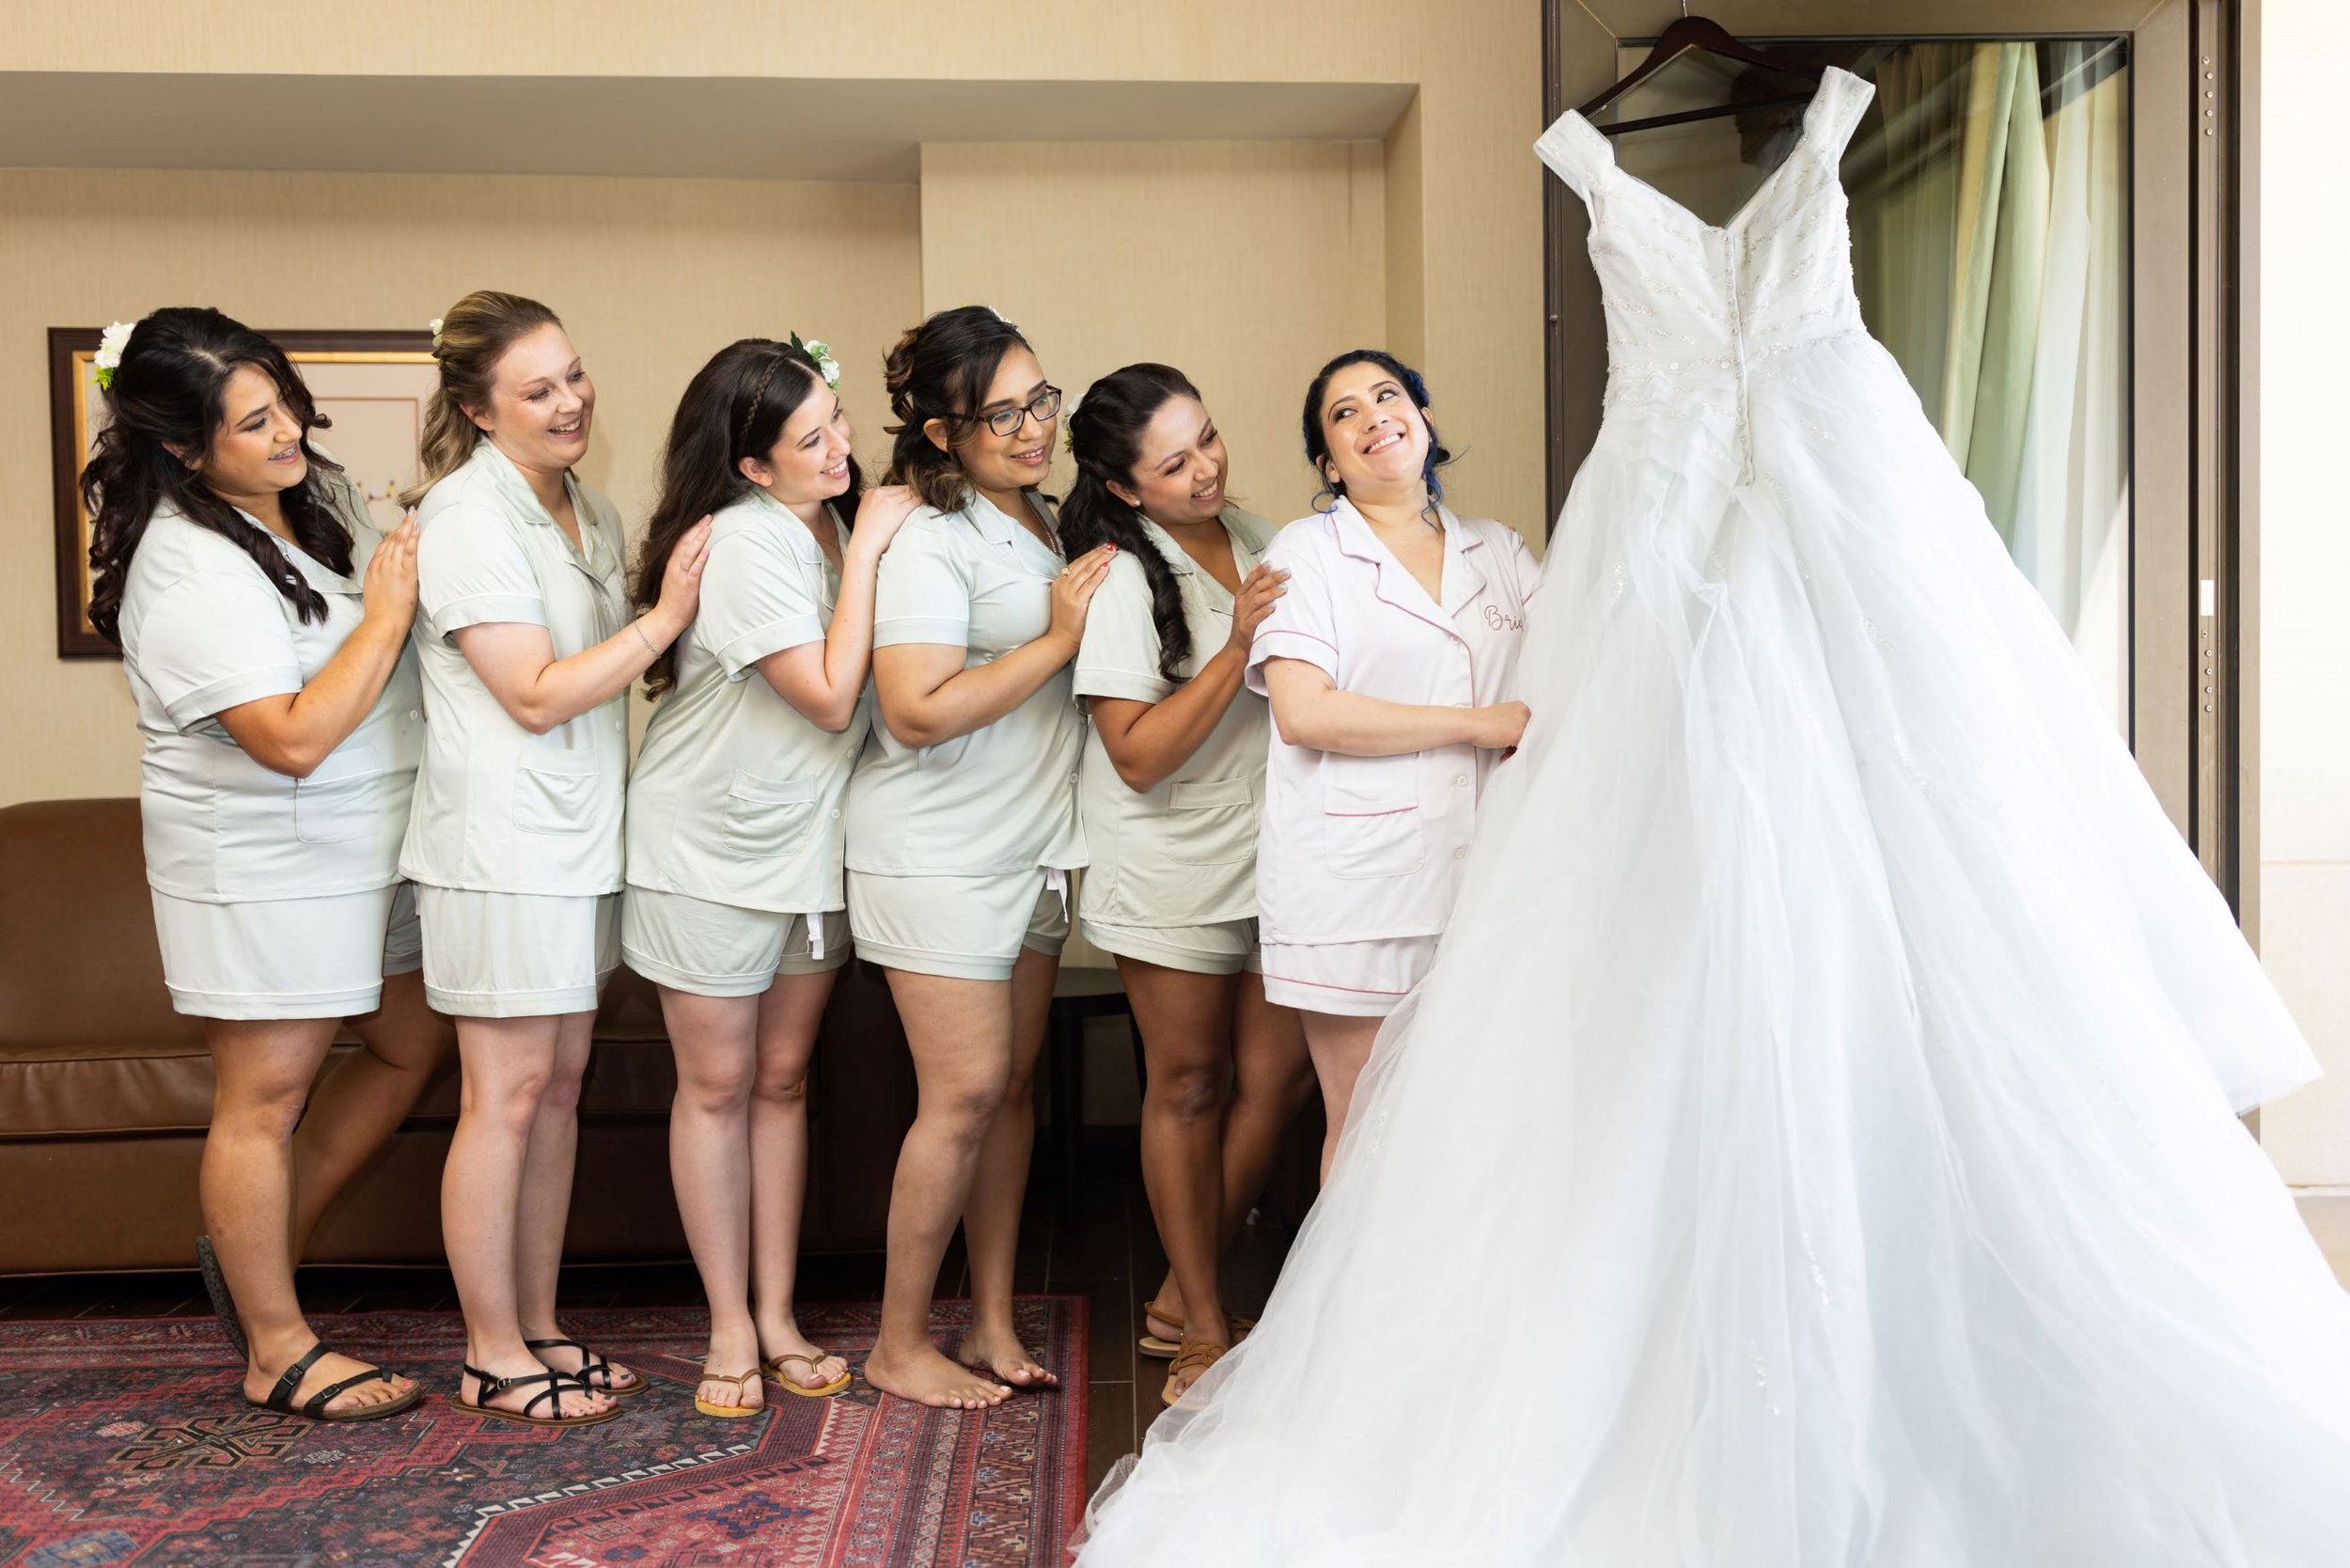 Bride with Bridesmaids and Dress.jpg